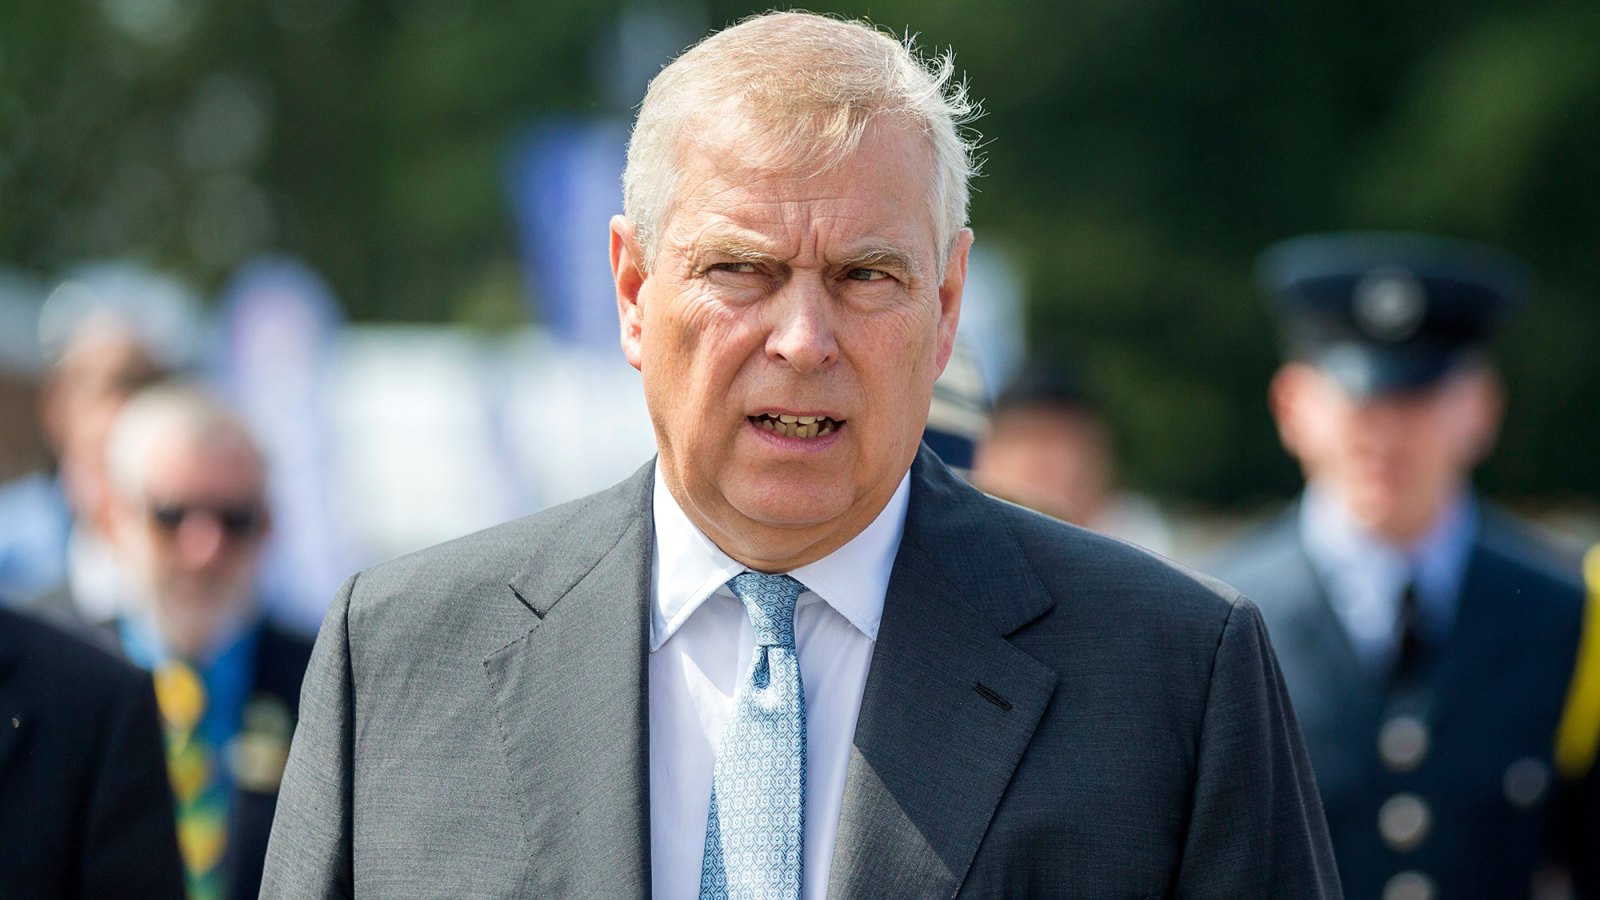 Prince Andrew Trial Moving Forward as Judge Dismisses Request to Throw Out Sexual Assault Lawsuit